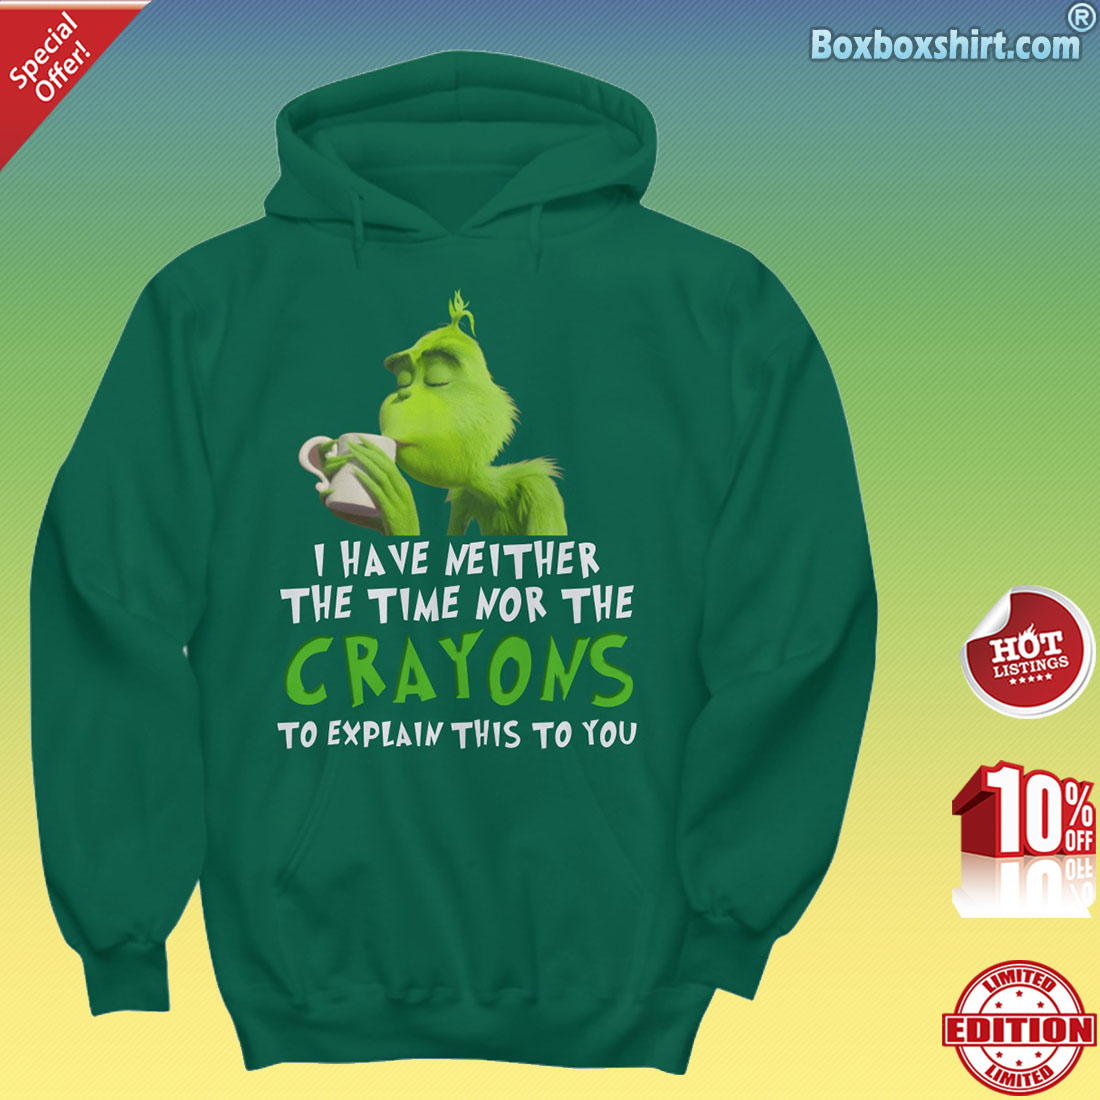 Grinch I have neither the time nor the crayons to explain this to you shirt